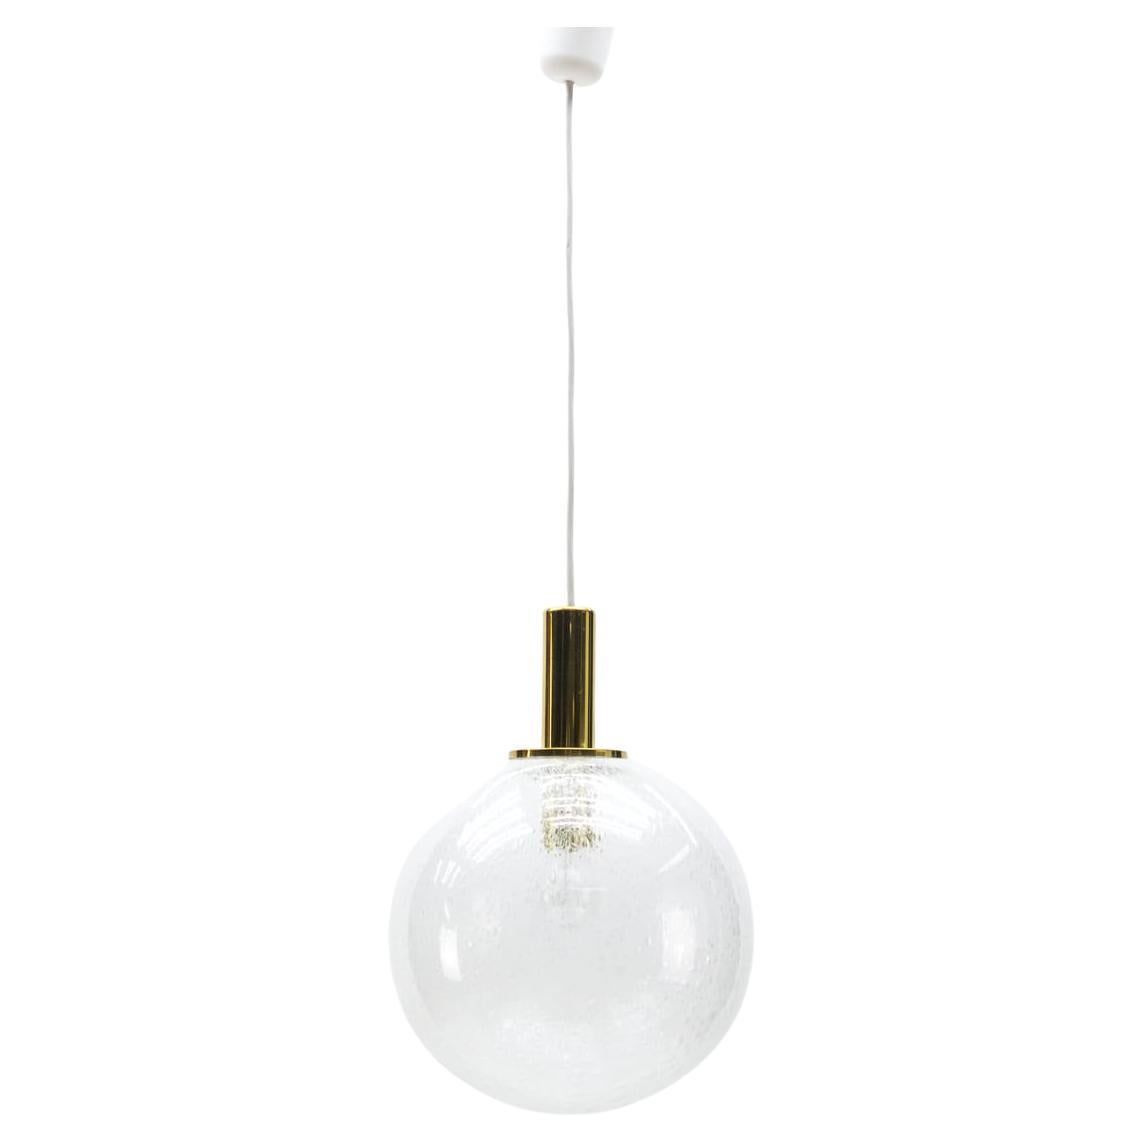 Very Elegant Brass and Blown Glass Globe Ceiling Lamp by Doria, Germany, 1960s